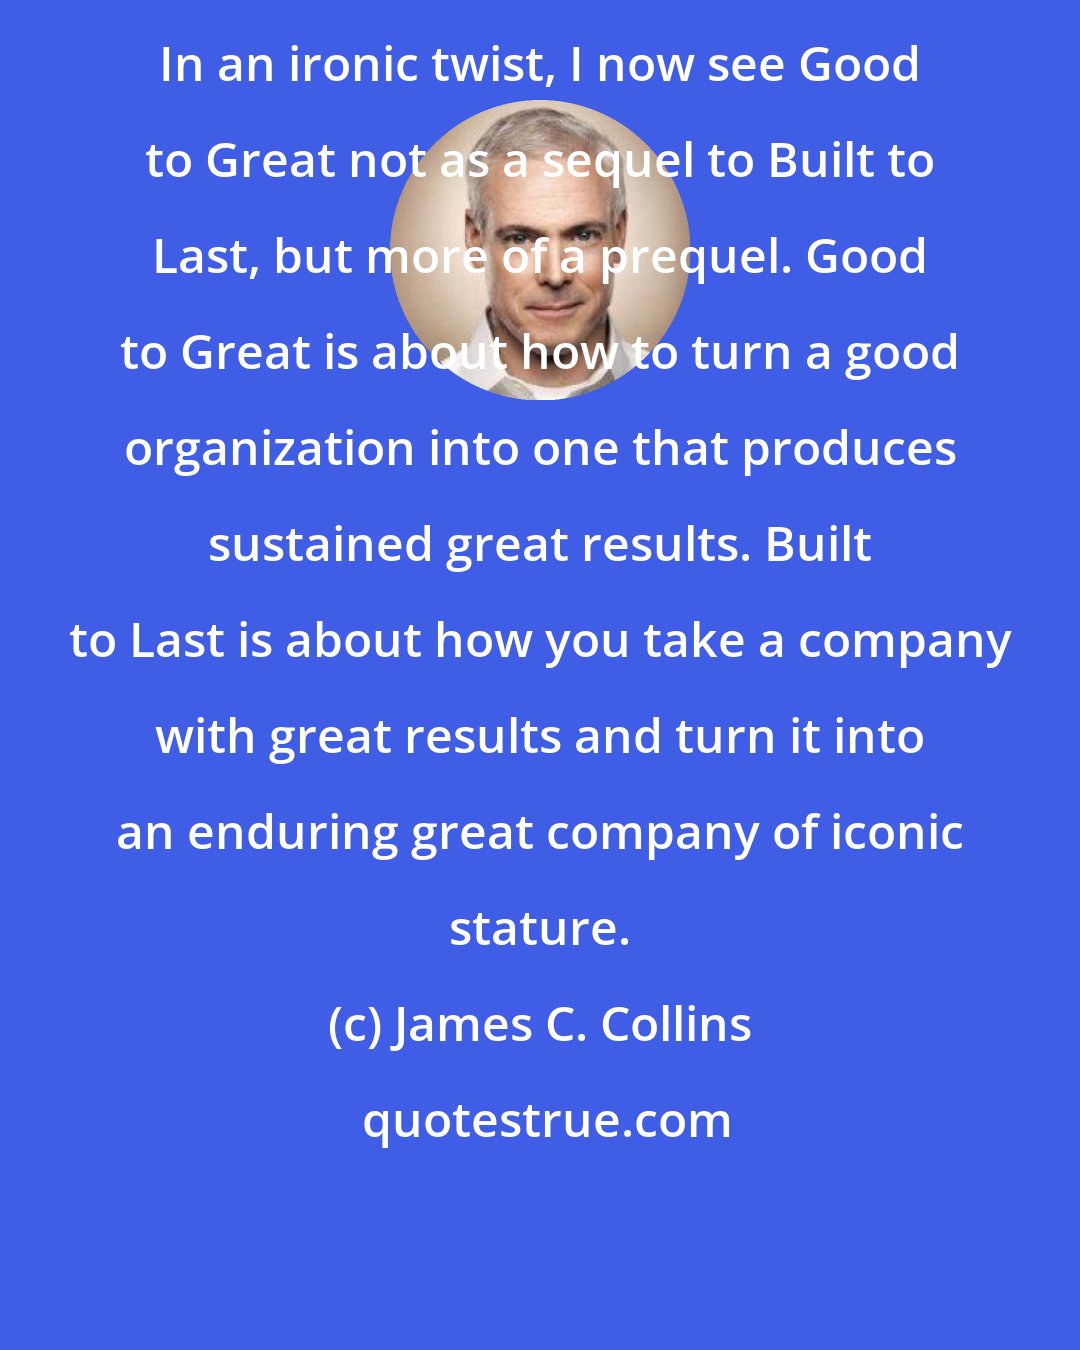 James C. Collins: In an ironic twist, I now see Good to Great not as a sequel to Built to Last, but more of a prequel. Good to Great is about how to turn a good organization into one that produces sustained great results. Built to Last is about how you take a company with great results and turn it into an enduring great company of iconic stature.